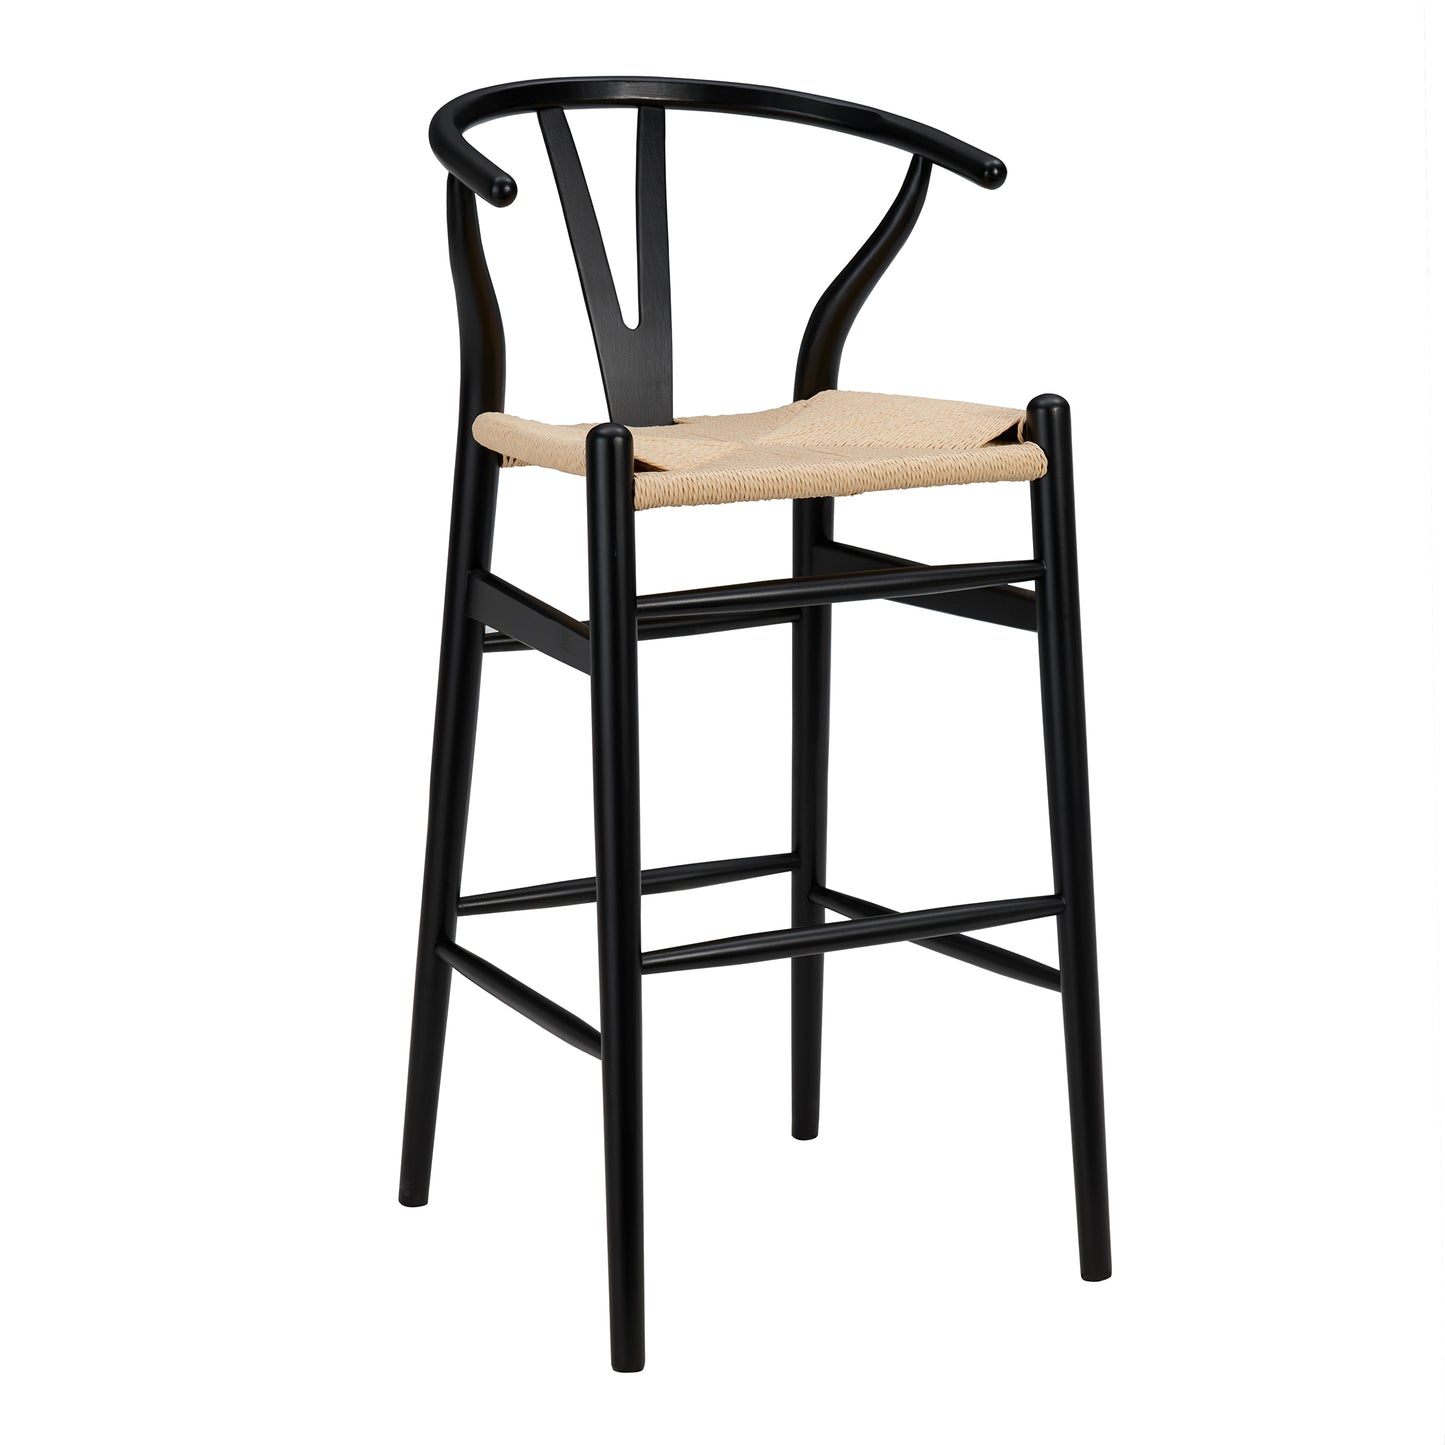 Evelina Bar Stool in Black Frame and Natural Seat - Set of 1